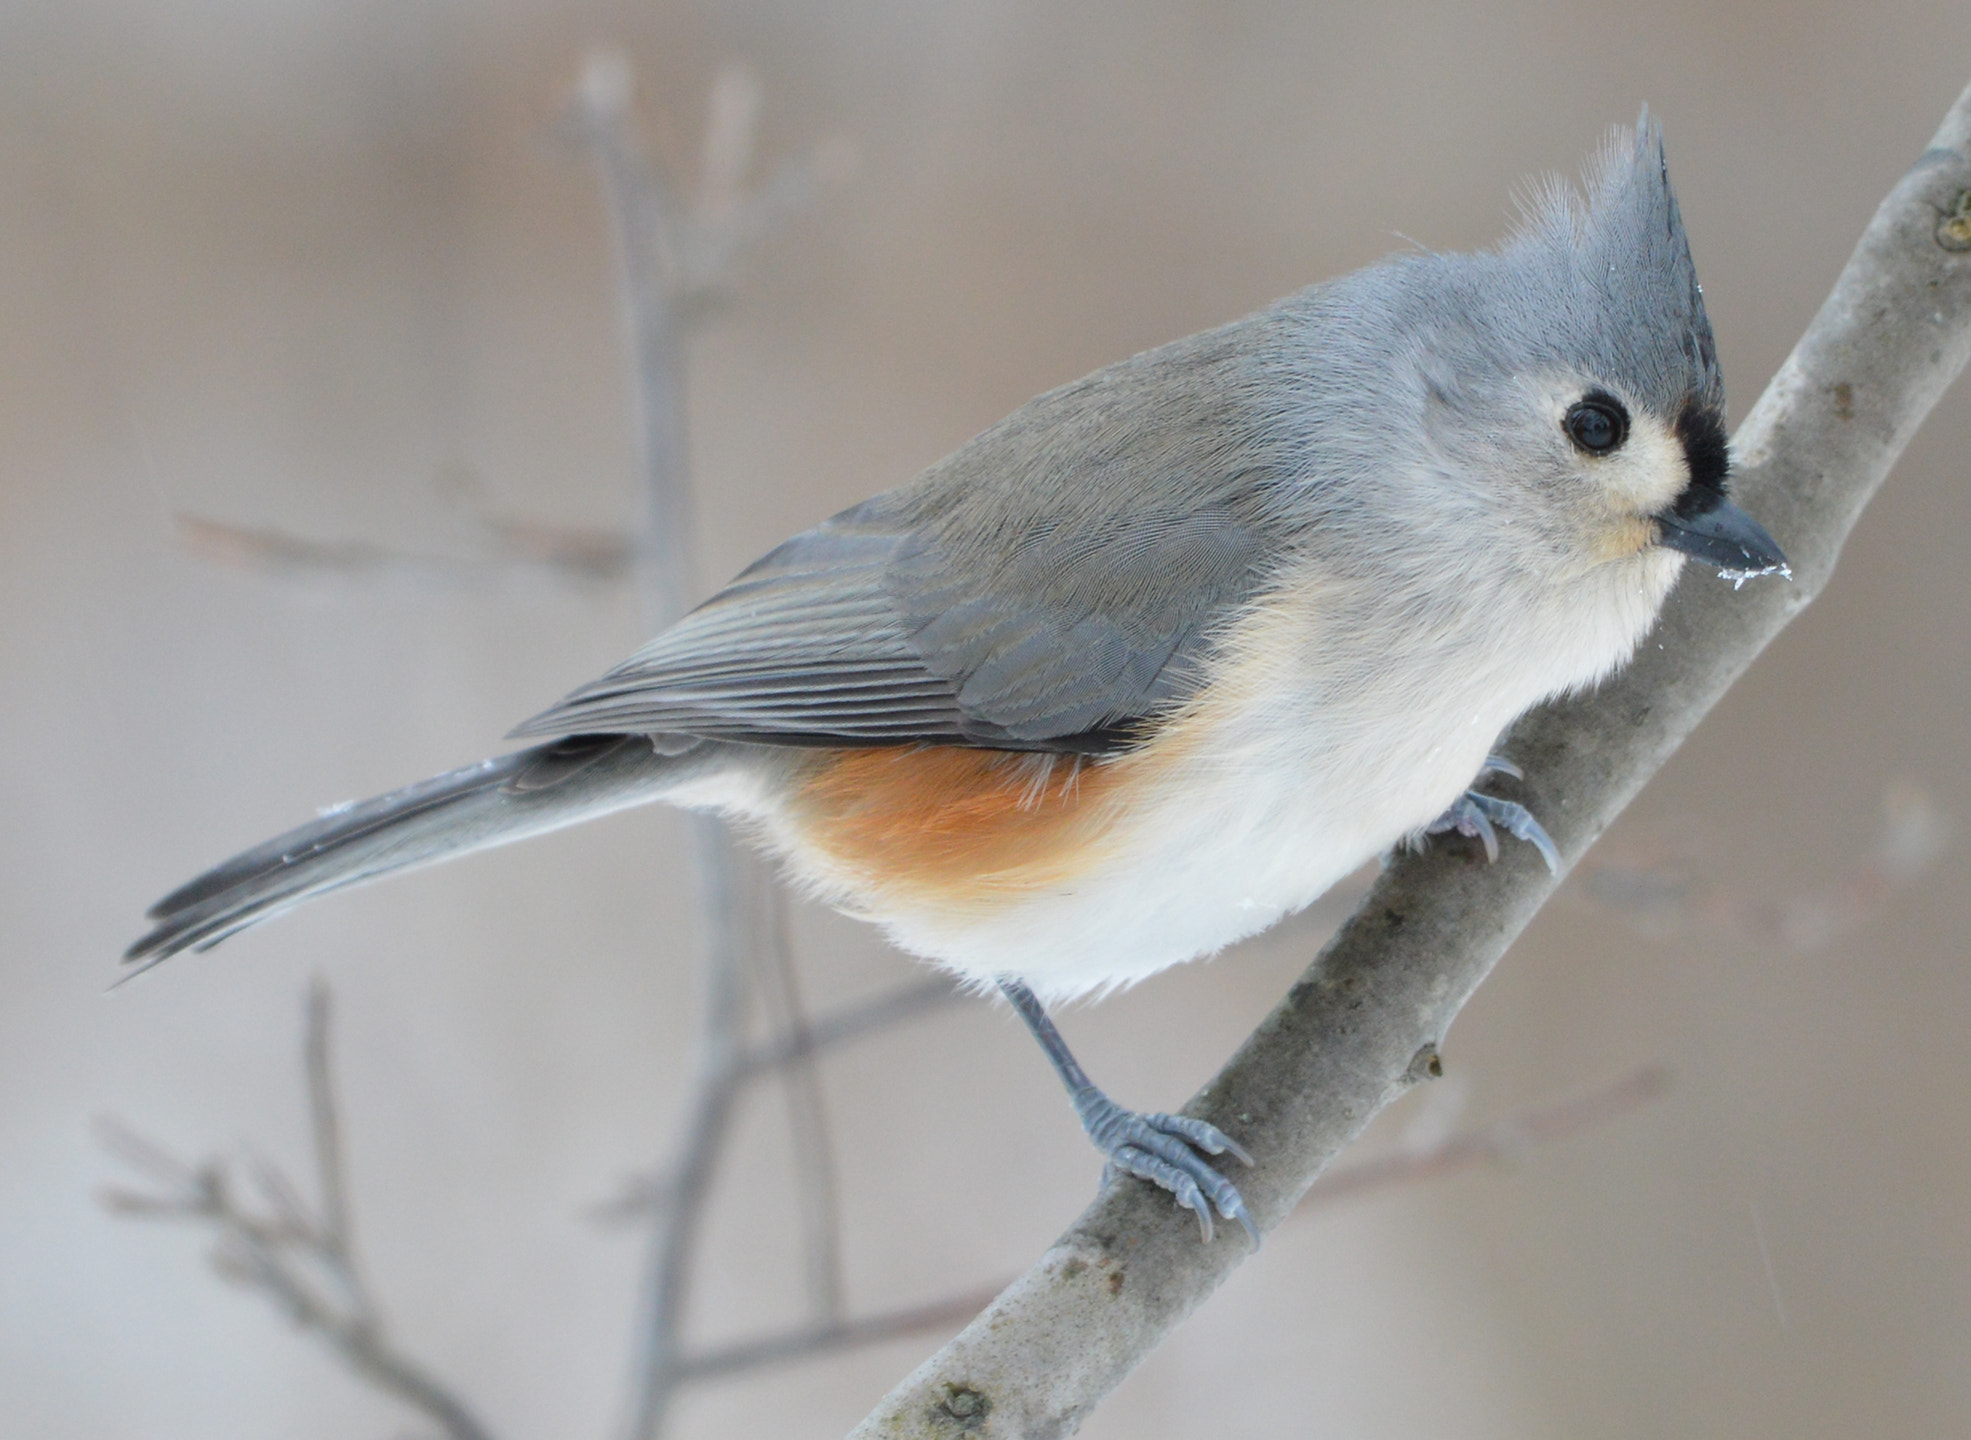 A Tufted Titmouse sitting on a tree branch